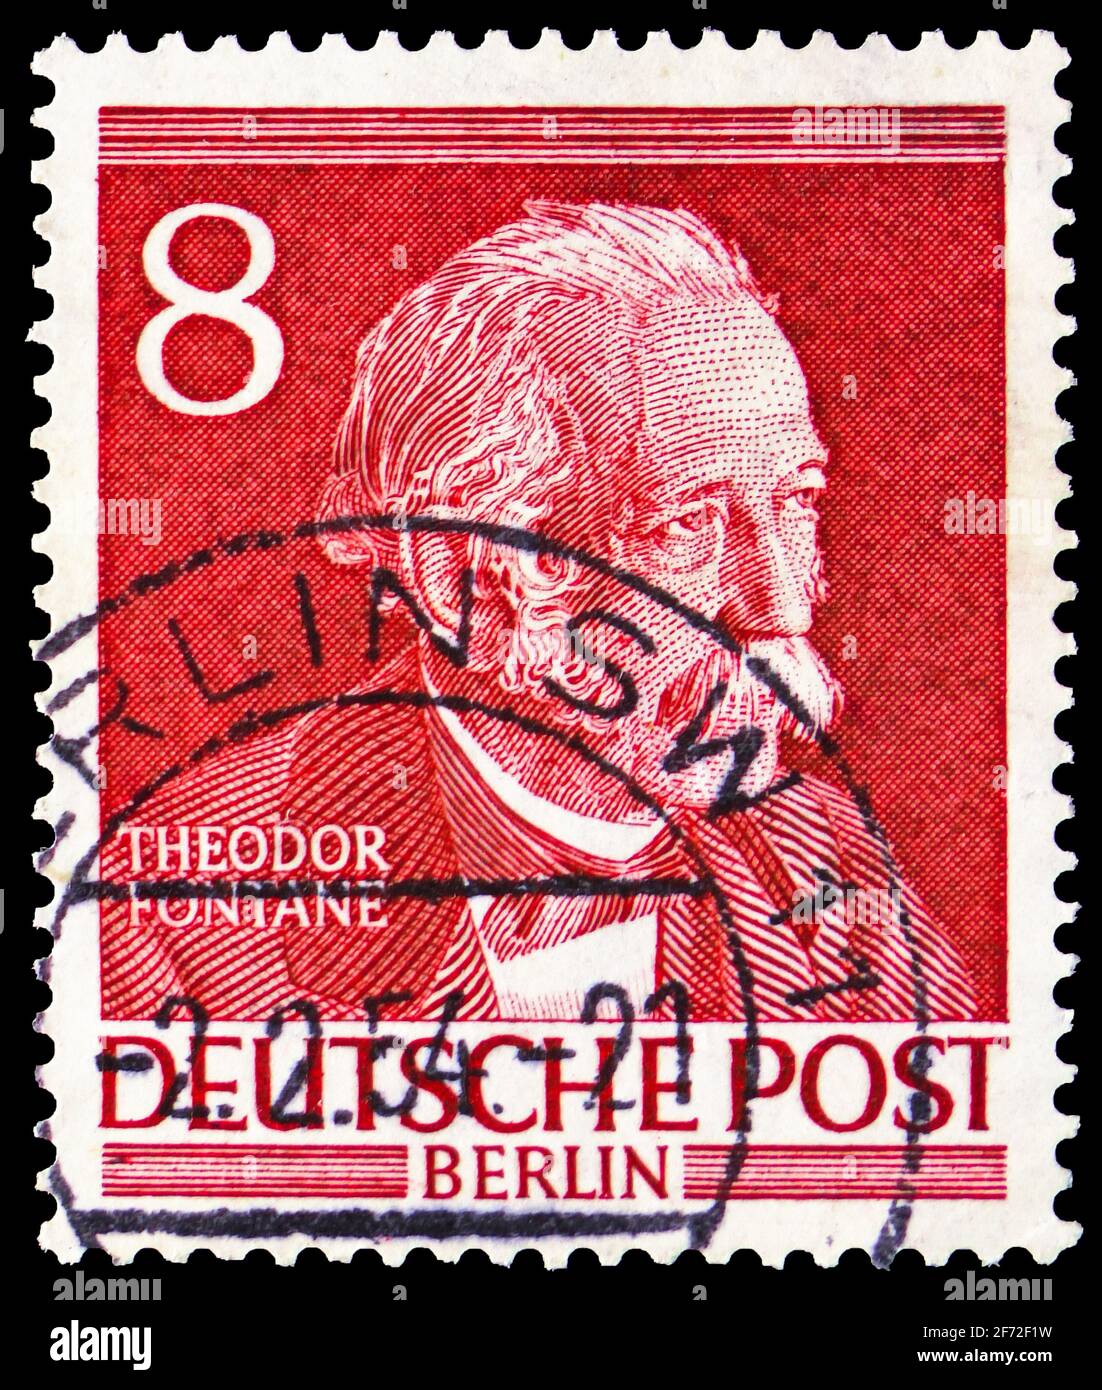 MOSCOW, RUSSIA - DECEMBER 22, 2020: Postage stamp printed in Germany, Berlin, shows Theodor Fontane (1819-1898), Famous Berliners serie, circa 1953 Stock Photo